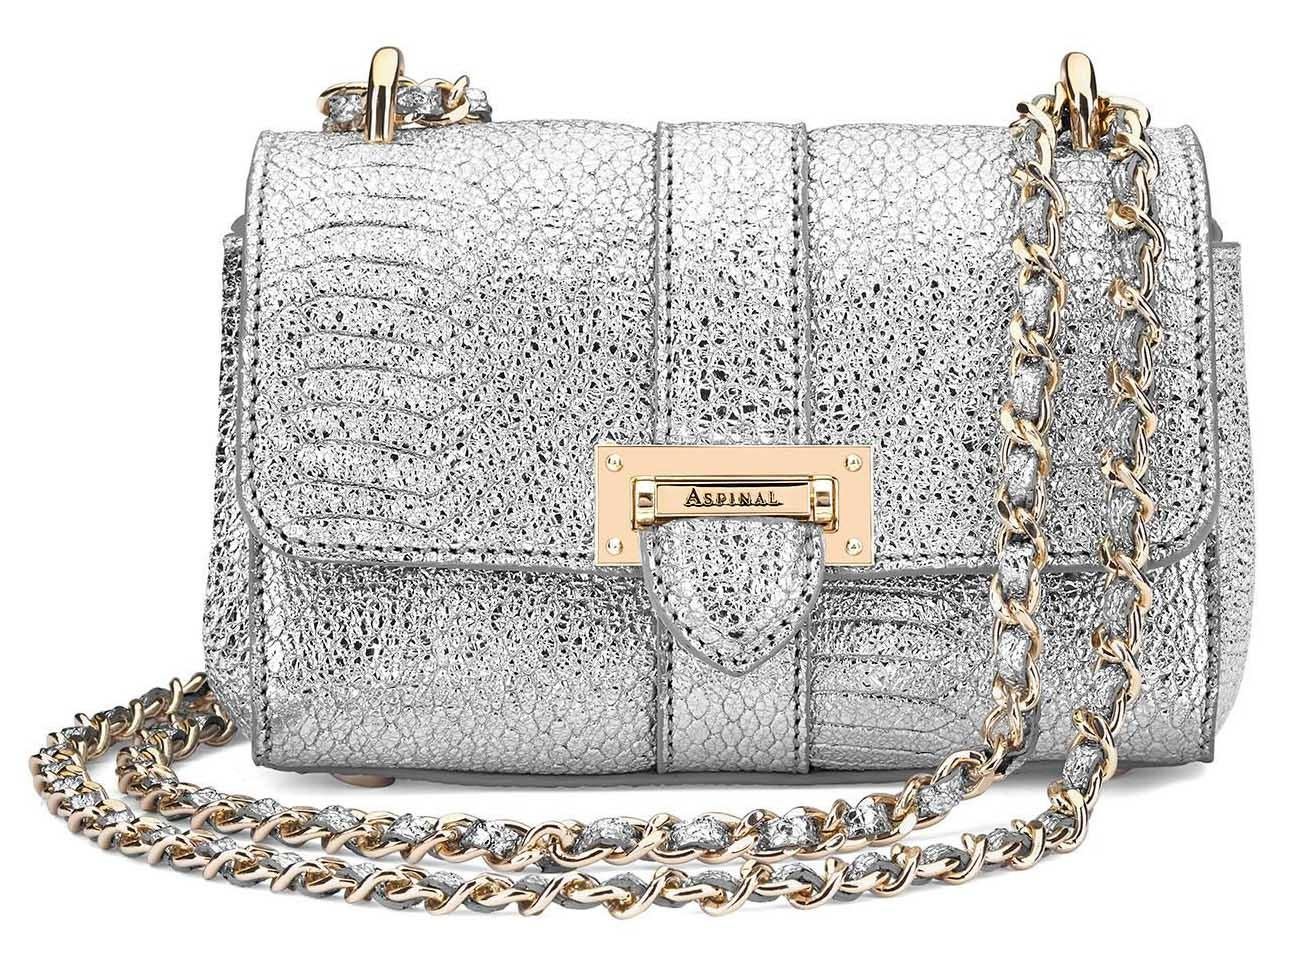 The micro lottie bag, £325, Aspinal of London